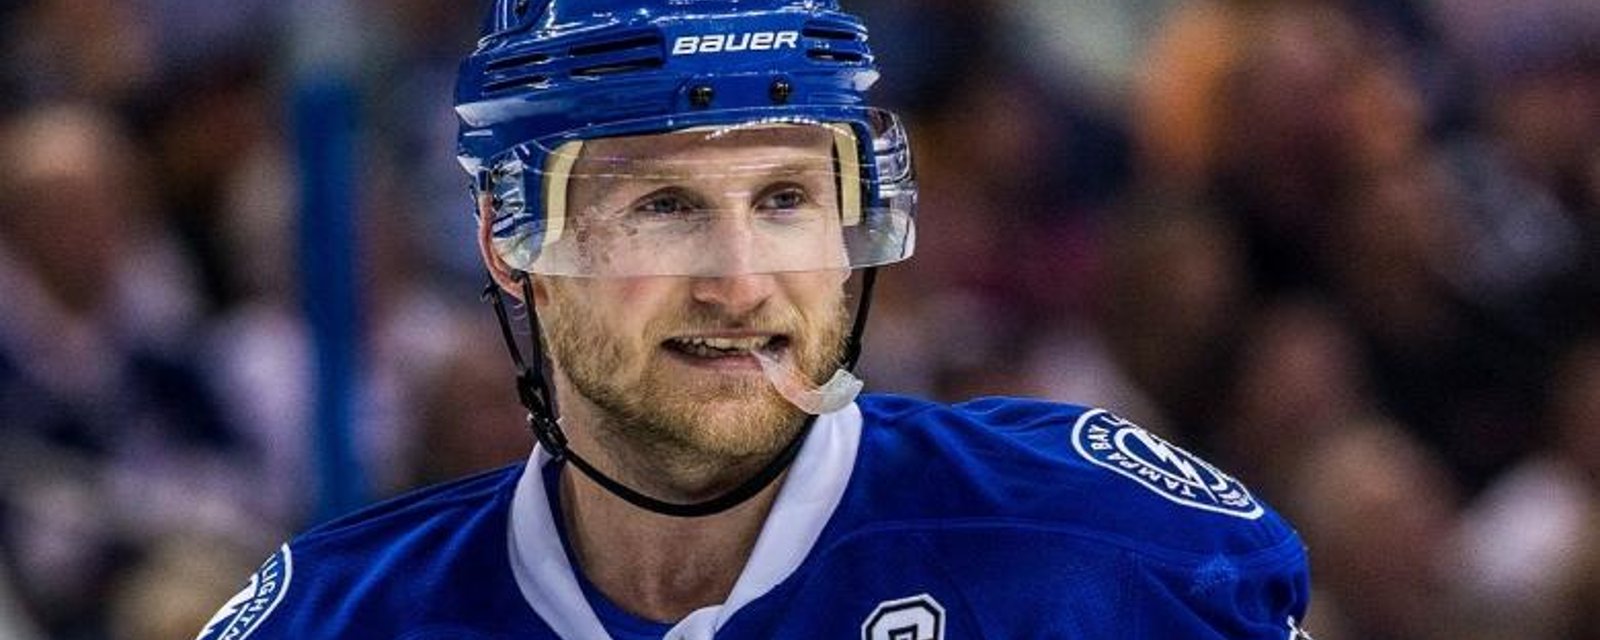 Steven Stamkos has just turned the tables on a creepy stalker.